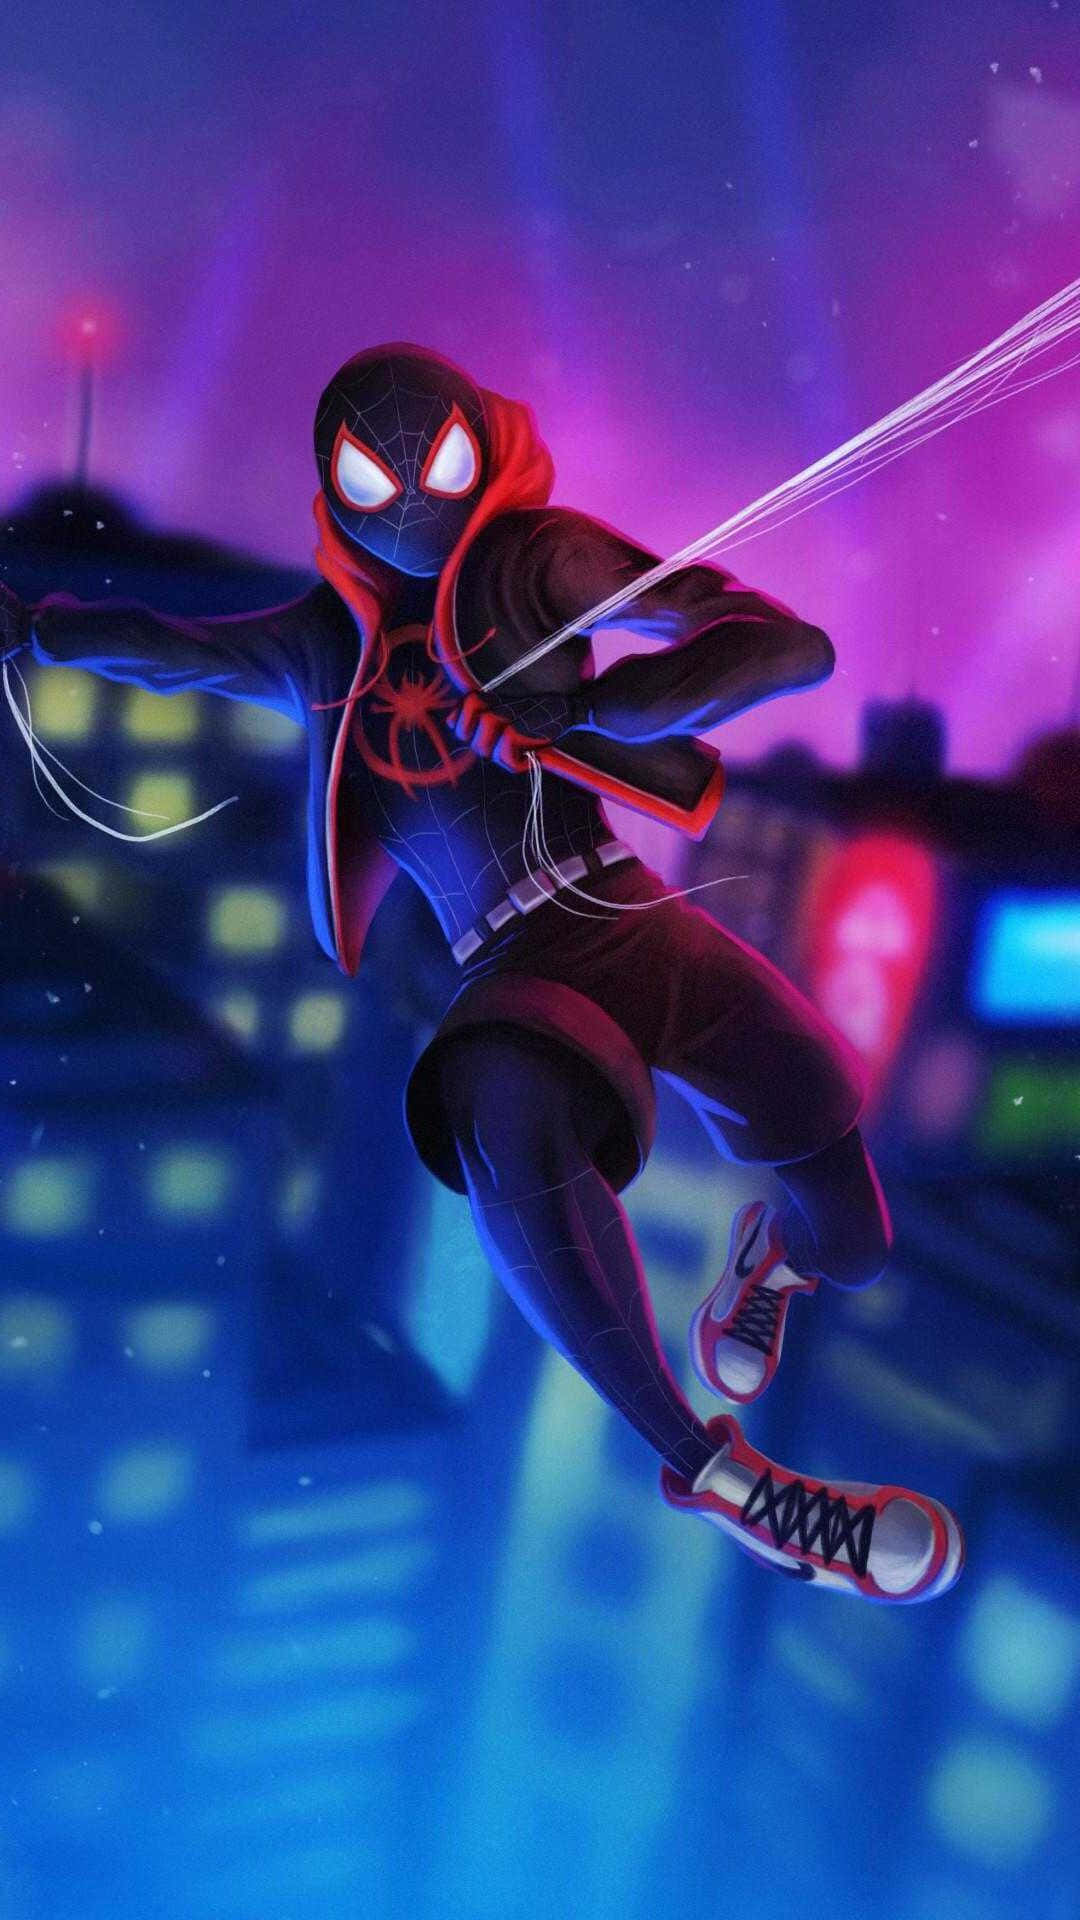 Miles Morales: Spiderman for a New Generation